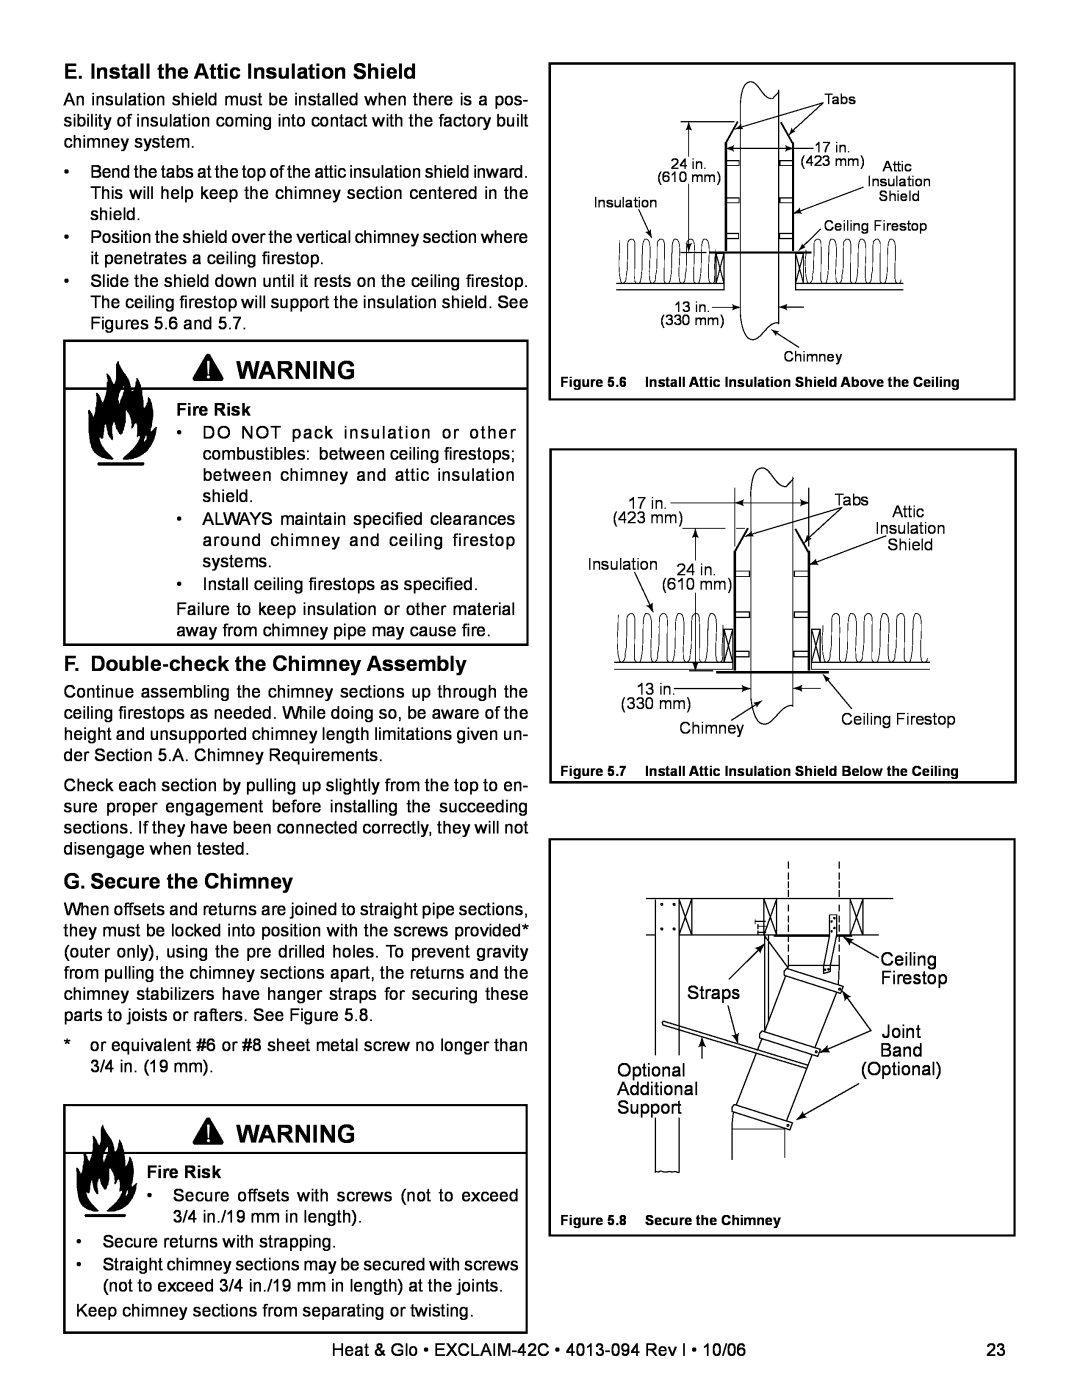 Heat & Glo LifeStyle EXCLAIM-42T-C, EXCLAIM-42H-C Ceiling, Firestop, Joint, Band, Optional, Additional, Support, Fire Risk 